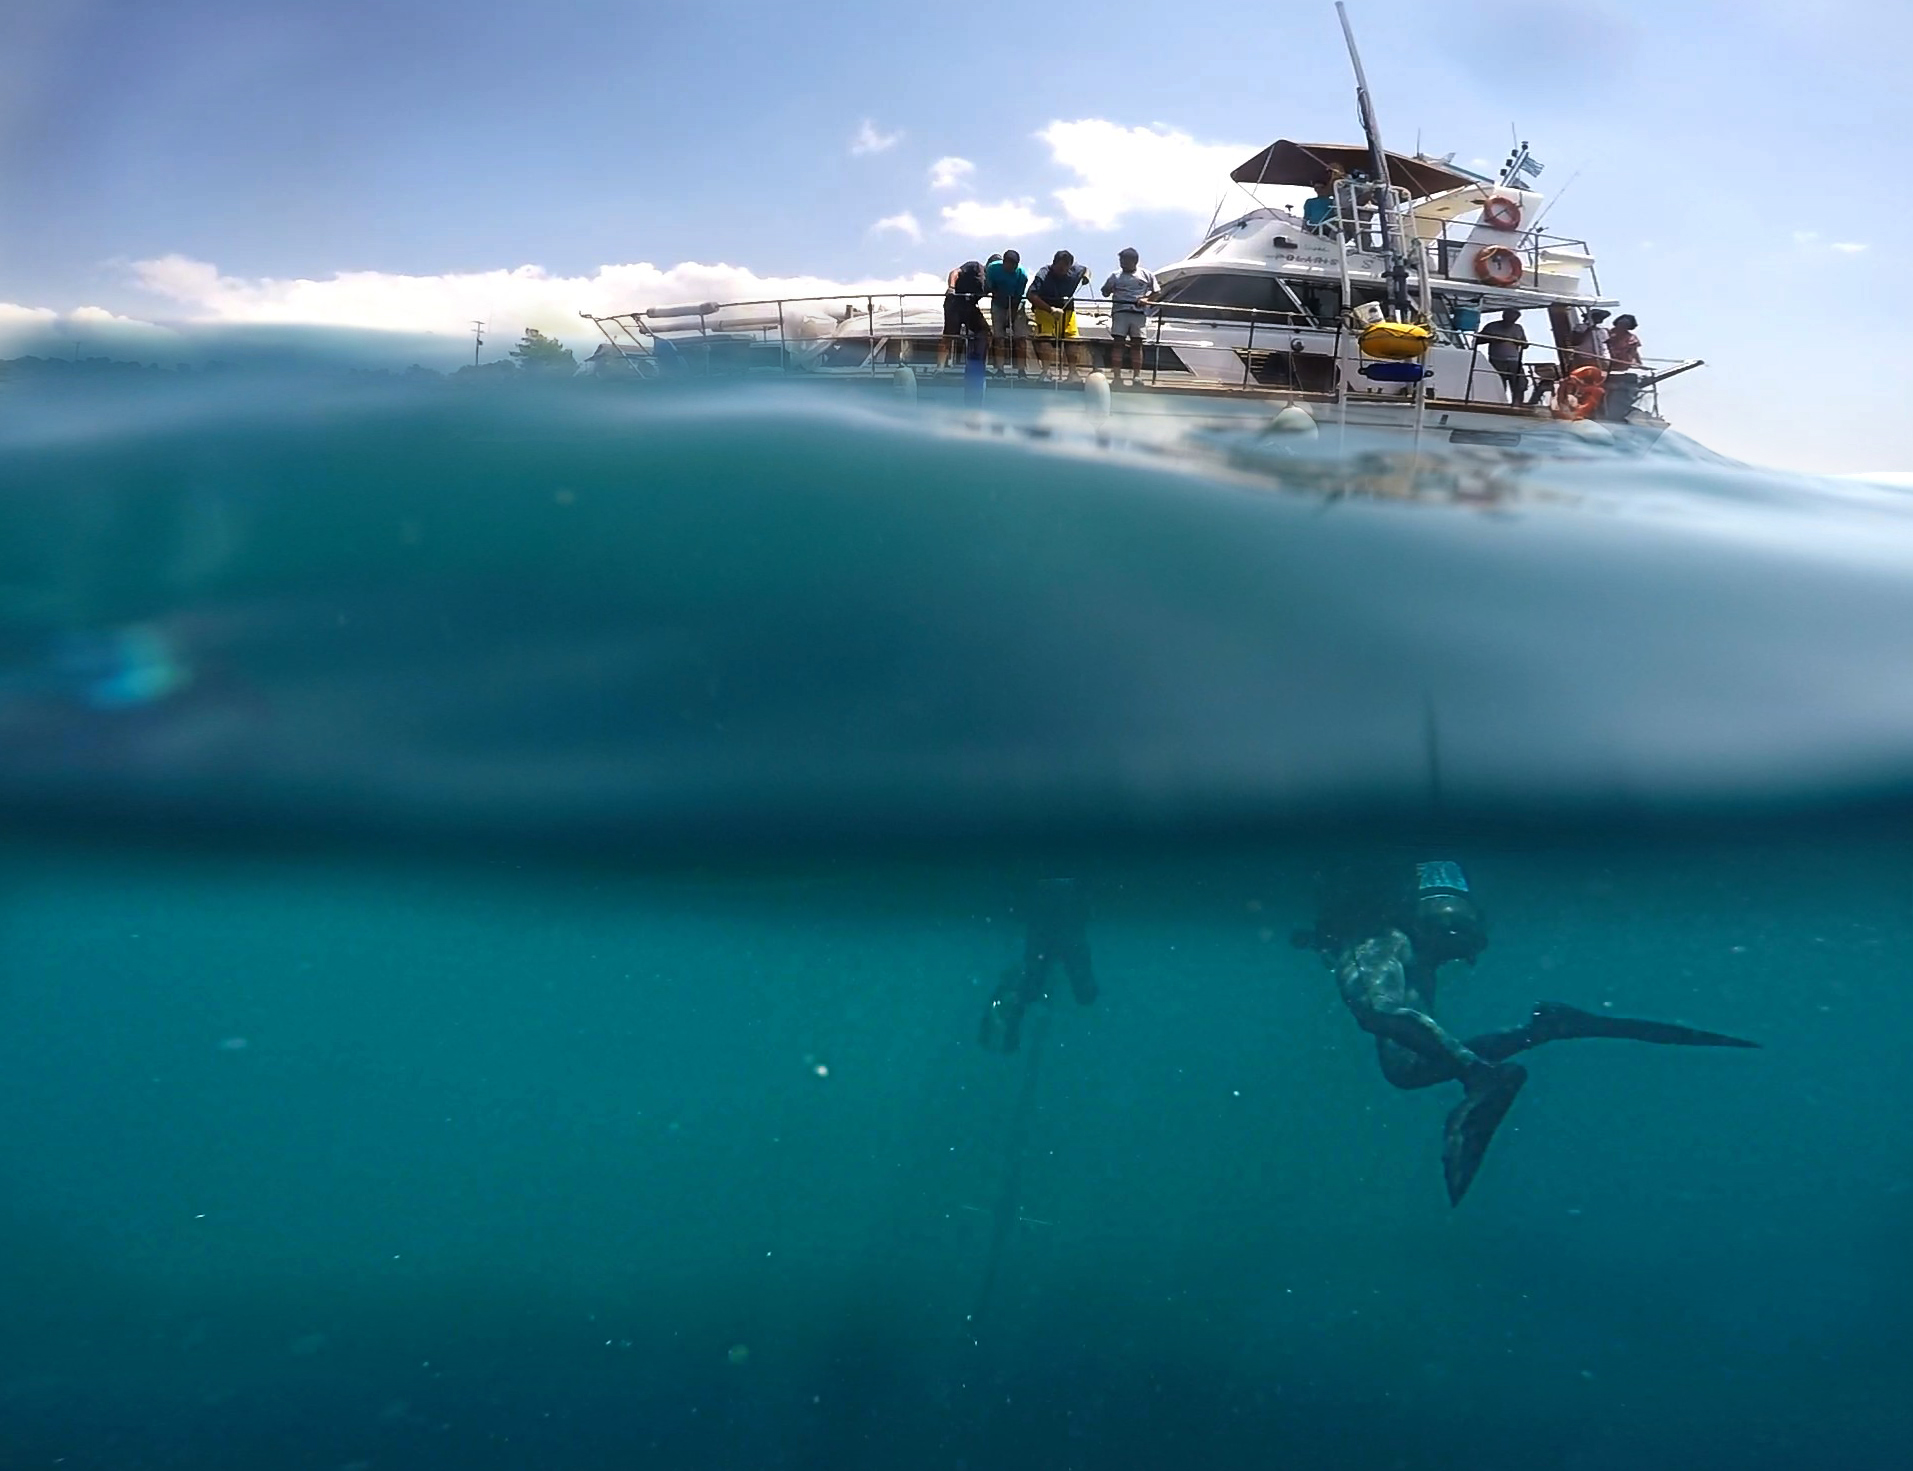 Divers below the research yacht